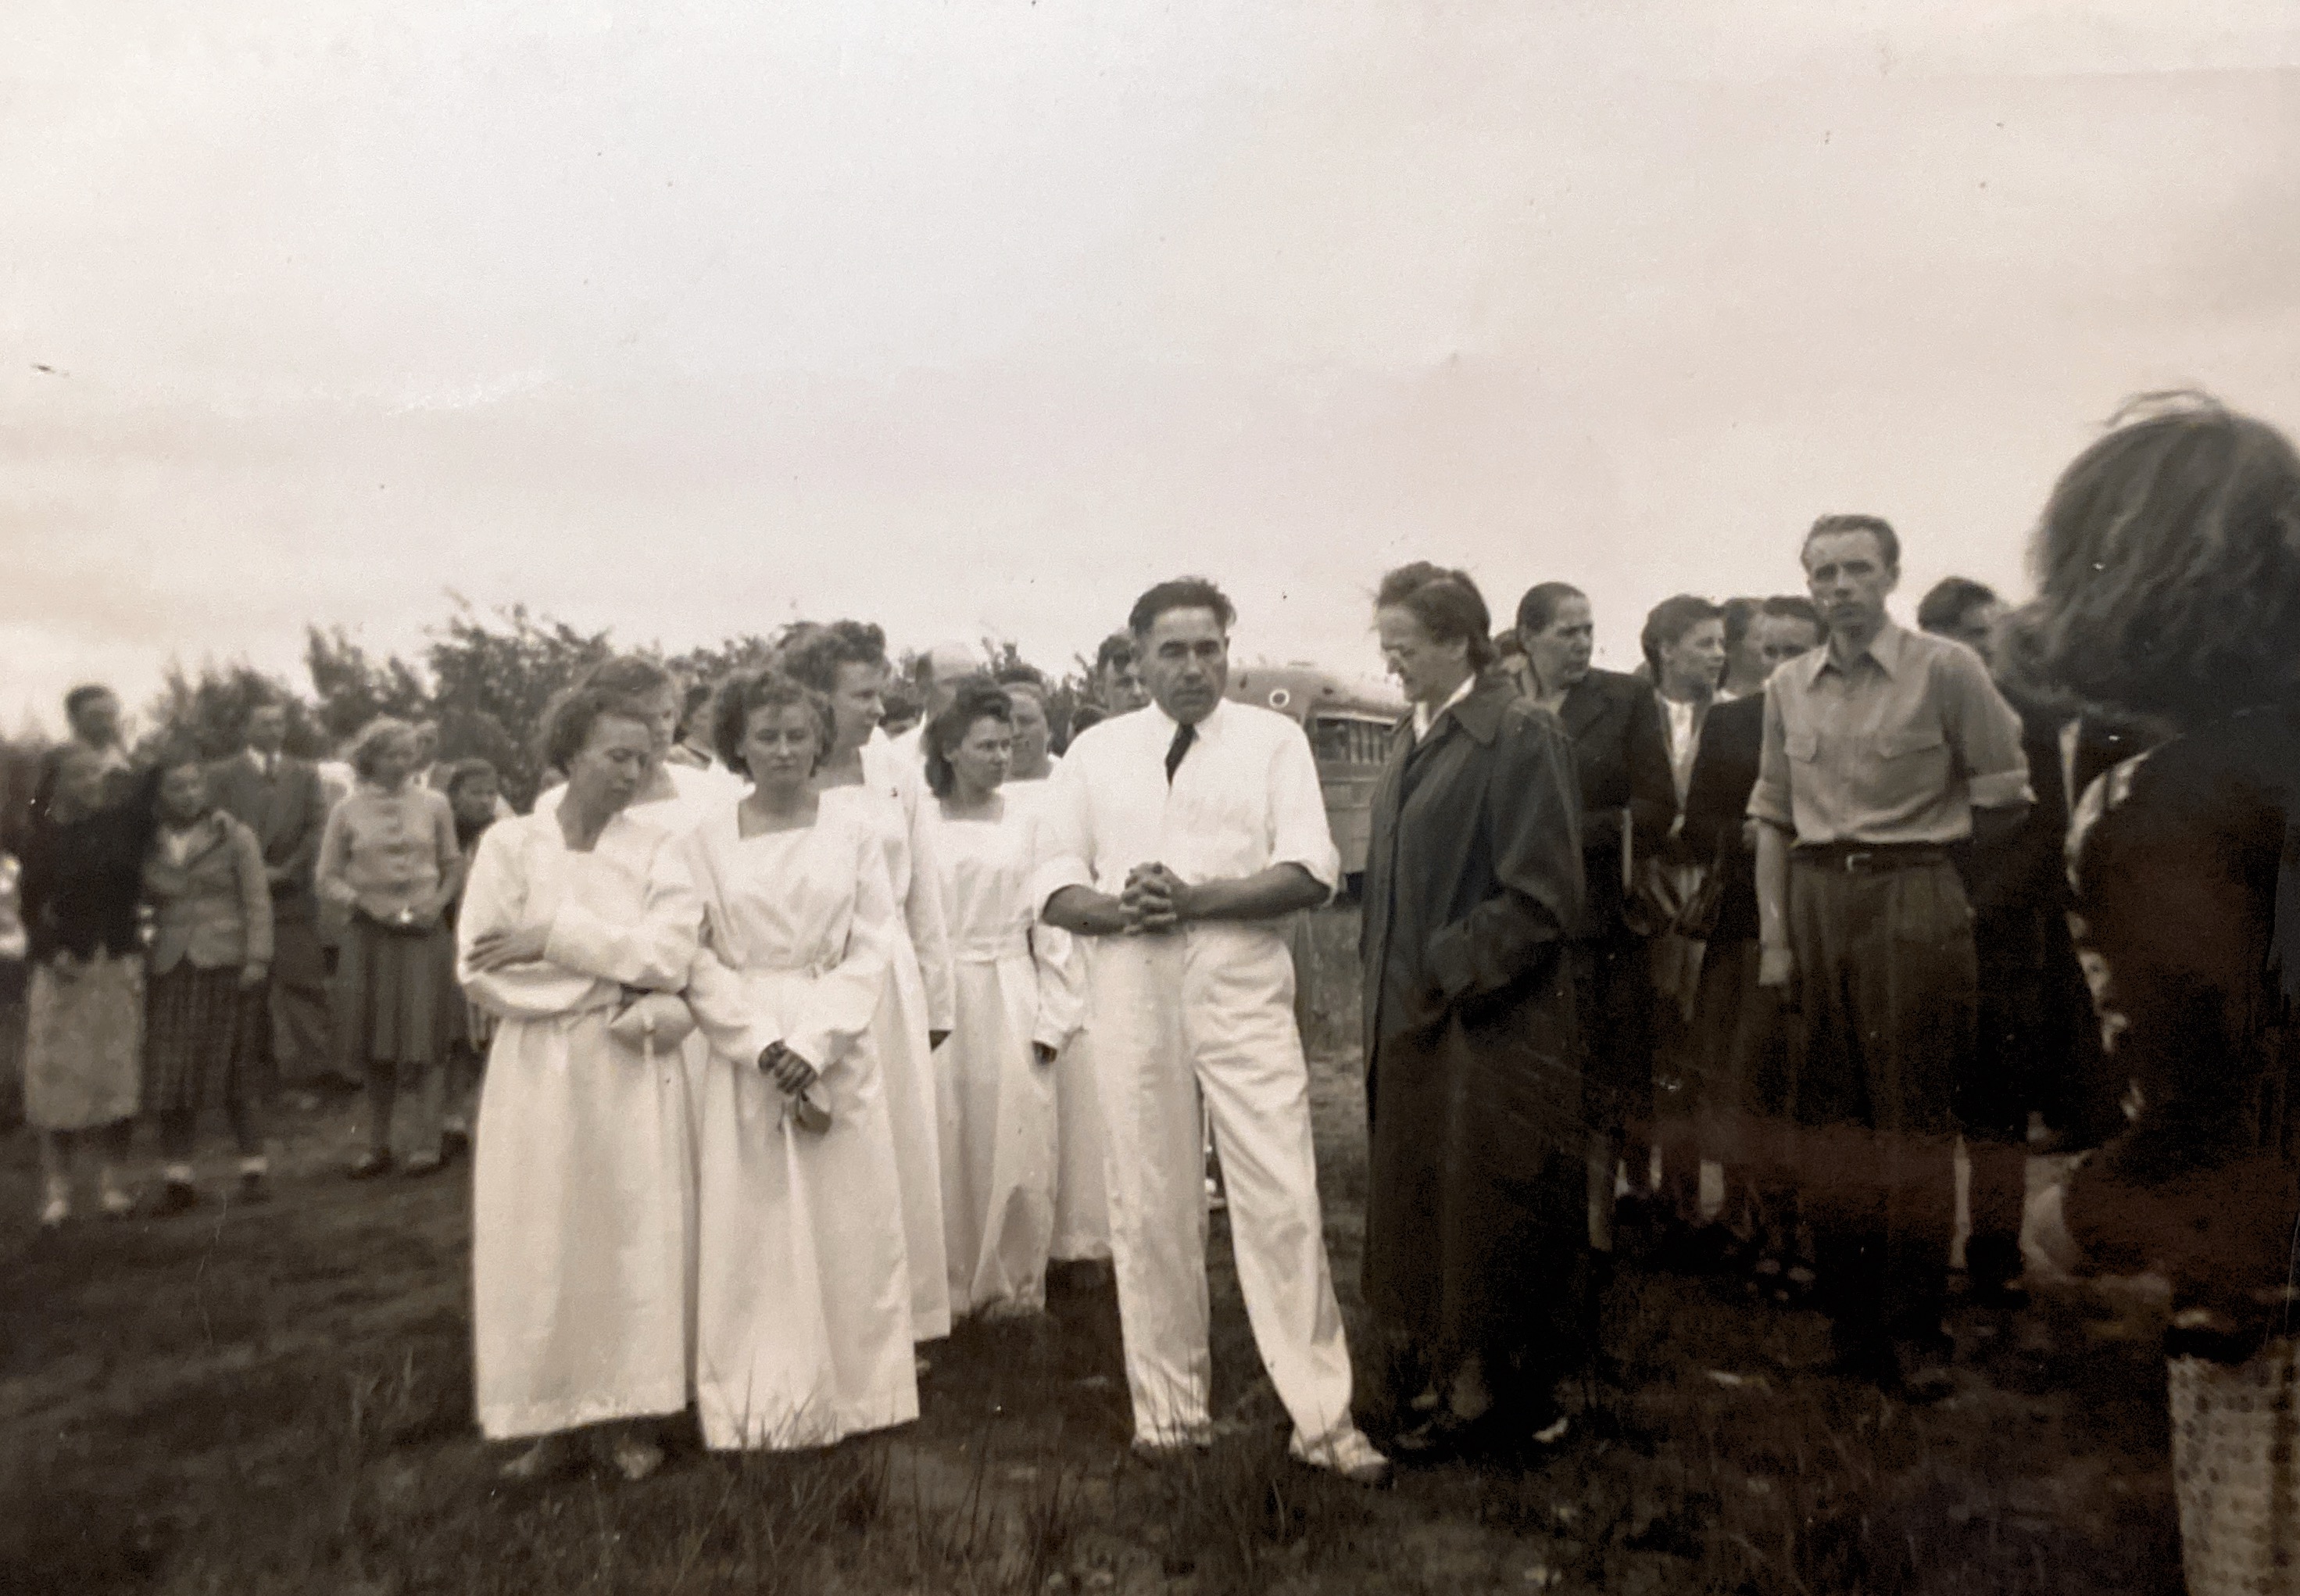 Baptism 1952 At Cooking Lake with L. Besler